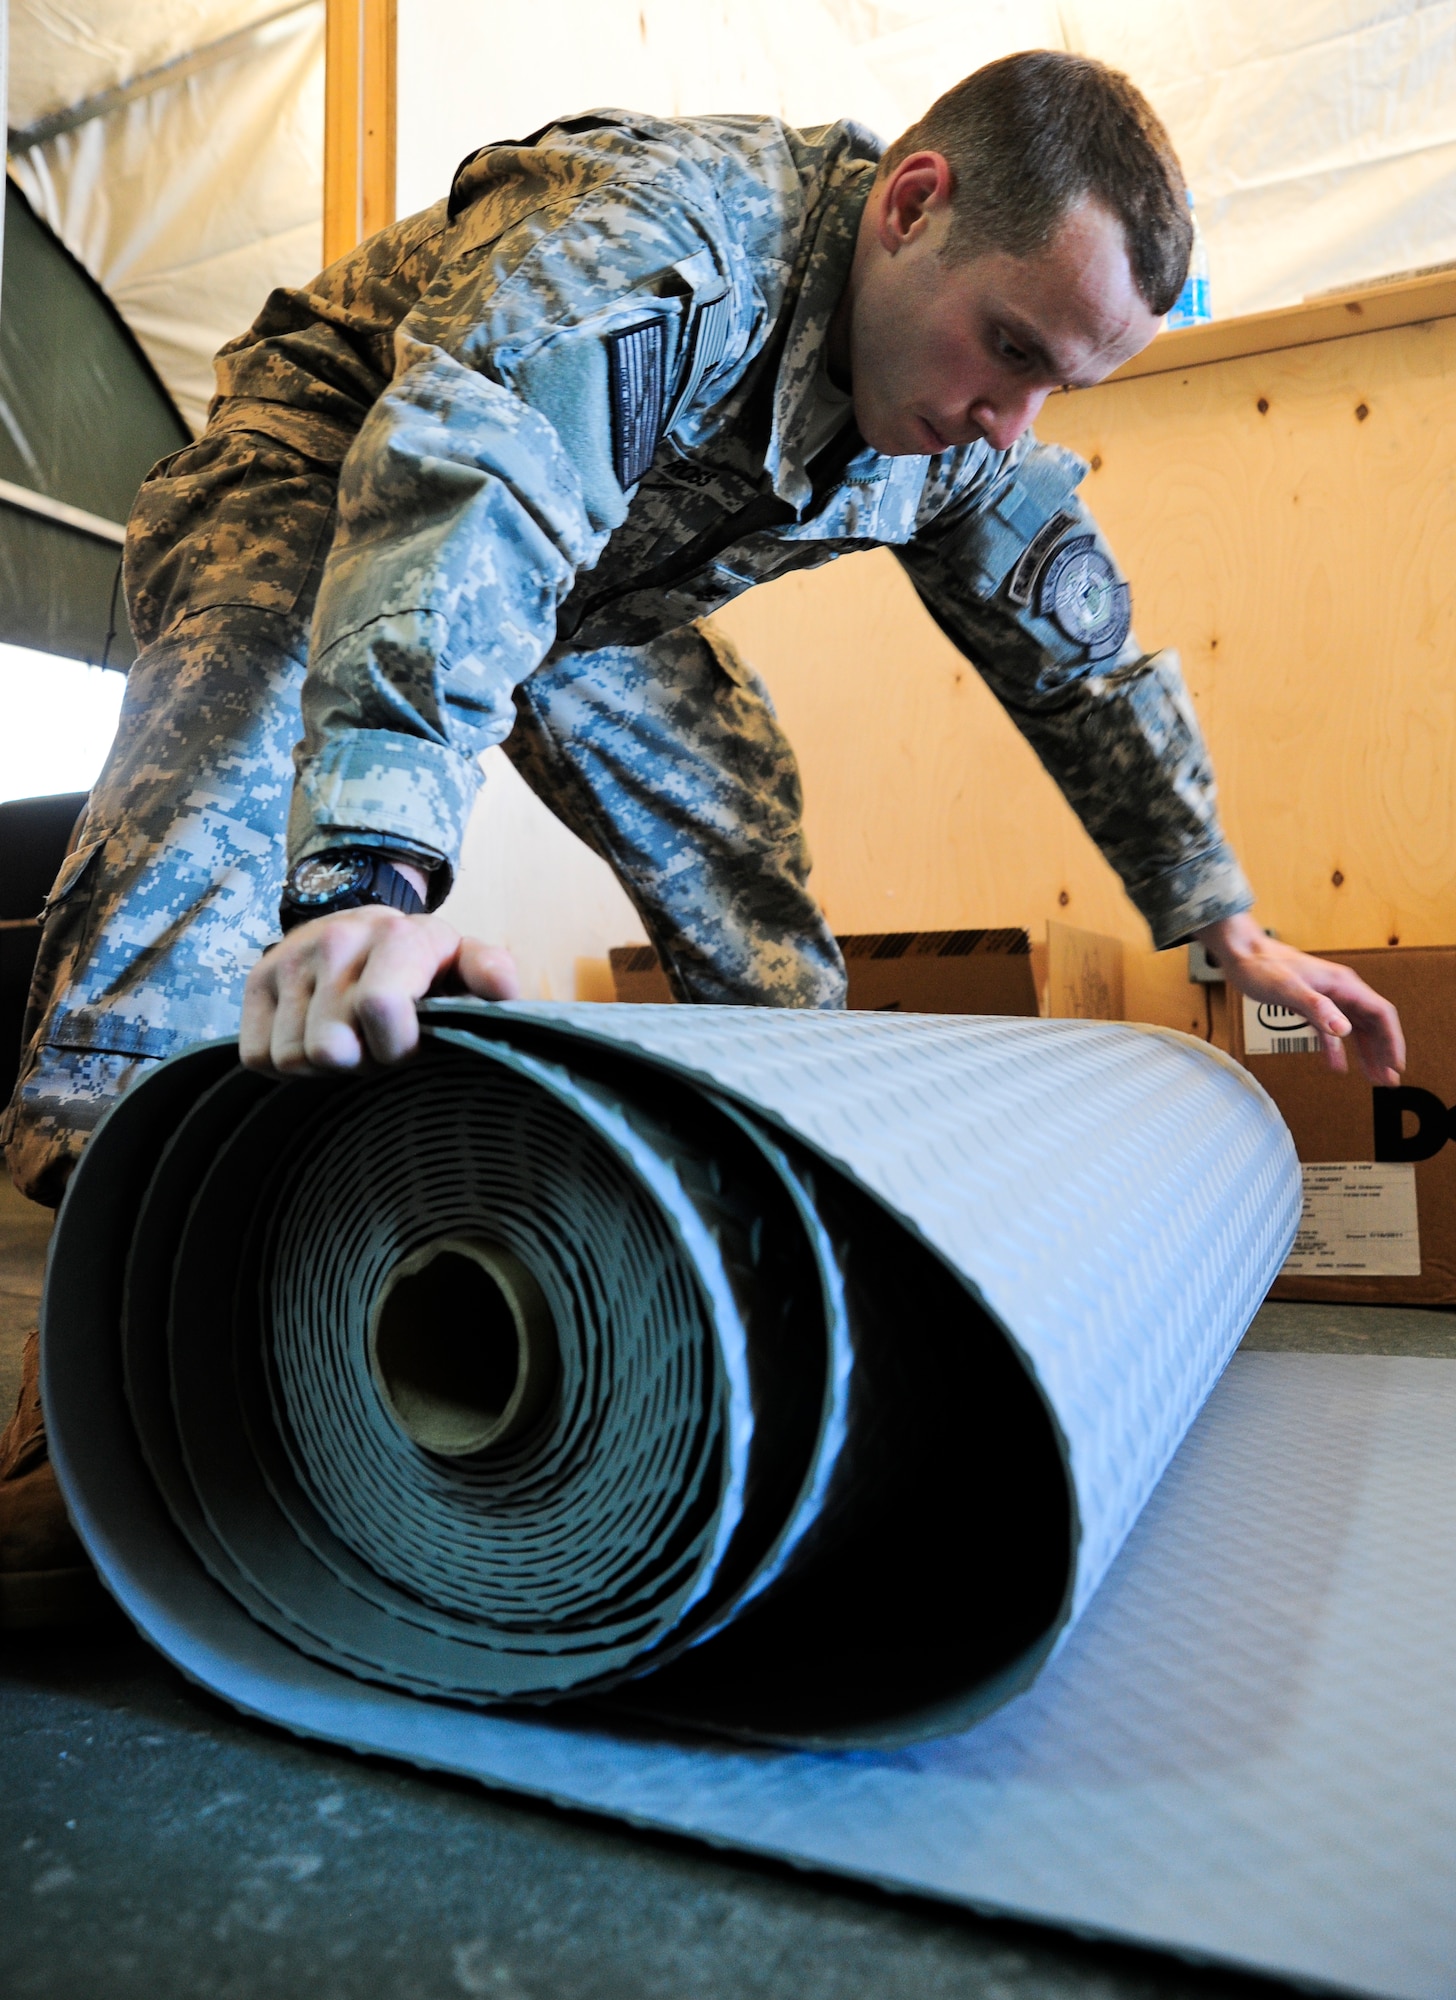 Aviation Ordnanceman 2nd Class John Ross rolls out floor covers Jan. 25, 2012, at the Naval Forces Central Command Forward Headquarters Manas at the Transit Center at Manas, Kyrgyzstan. Ross is one of the Sailors standing the NAVCENT FWD HQ Manas which will be responsible for moving and tracking Sailors into and out of Afghanistan. He is a liaison officer deployed here from the Naval Operations Support Center in Long Island, N.Y.(U.S. Air Force Photo/Staff Sgt. Angela Ruiz)